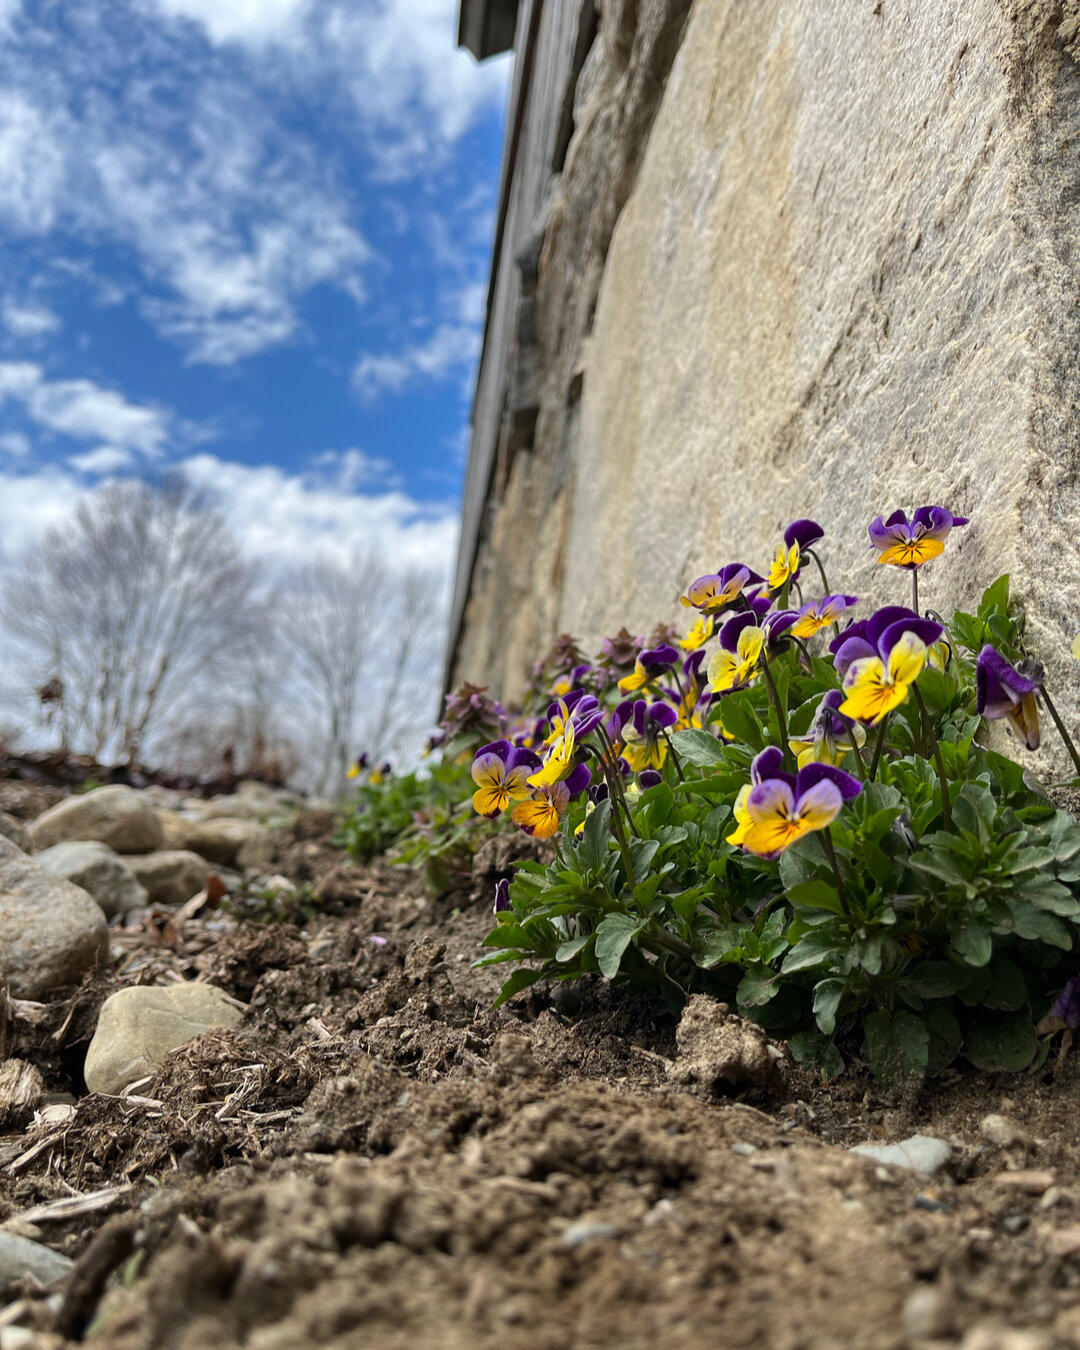 Spring finds a way.⠀⠀⠀⠀⠀⠀⠀⠀⠀
⠀⠀⠀⠀⠀⠀⠀⠀⠀
In the language of flowers, violas - also known as wild pansies or johnny-jump ups - are a symbol of love and thoughtfulness by their telltale petals. A purple viola is a sign of wisdom and dignity, the white of